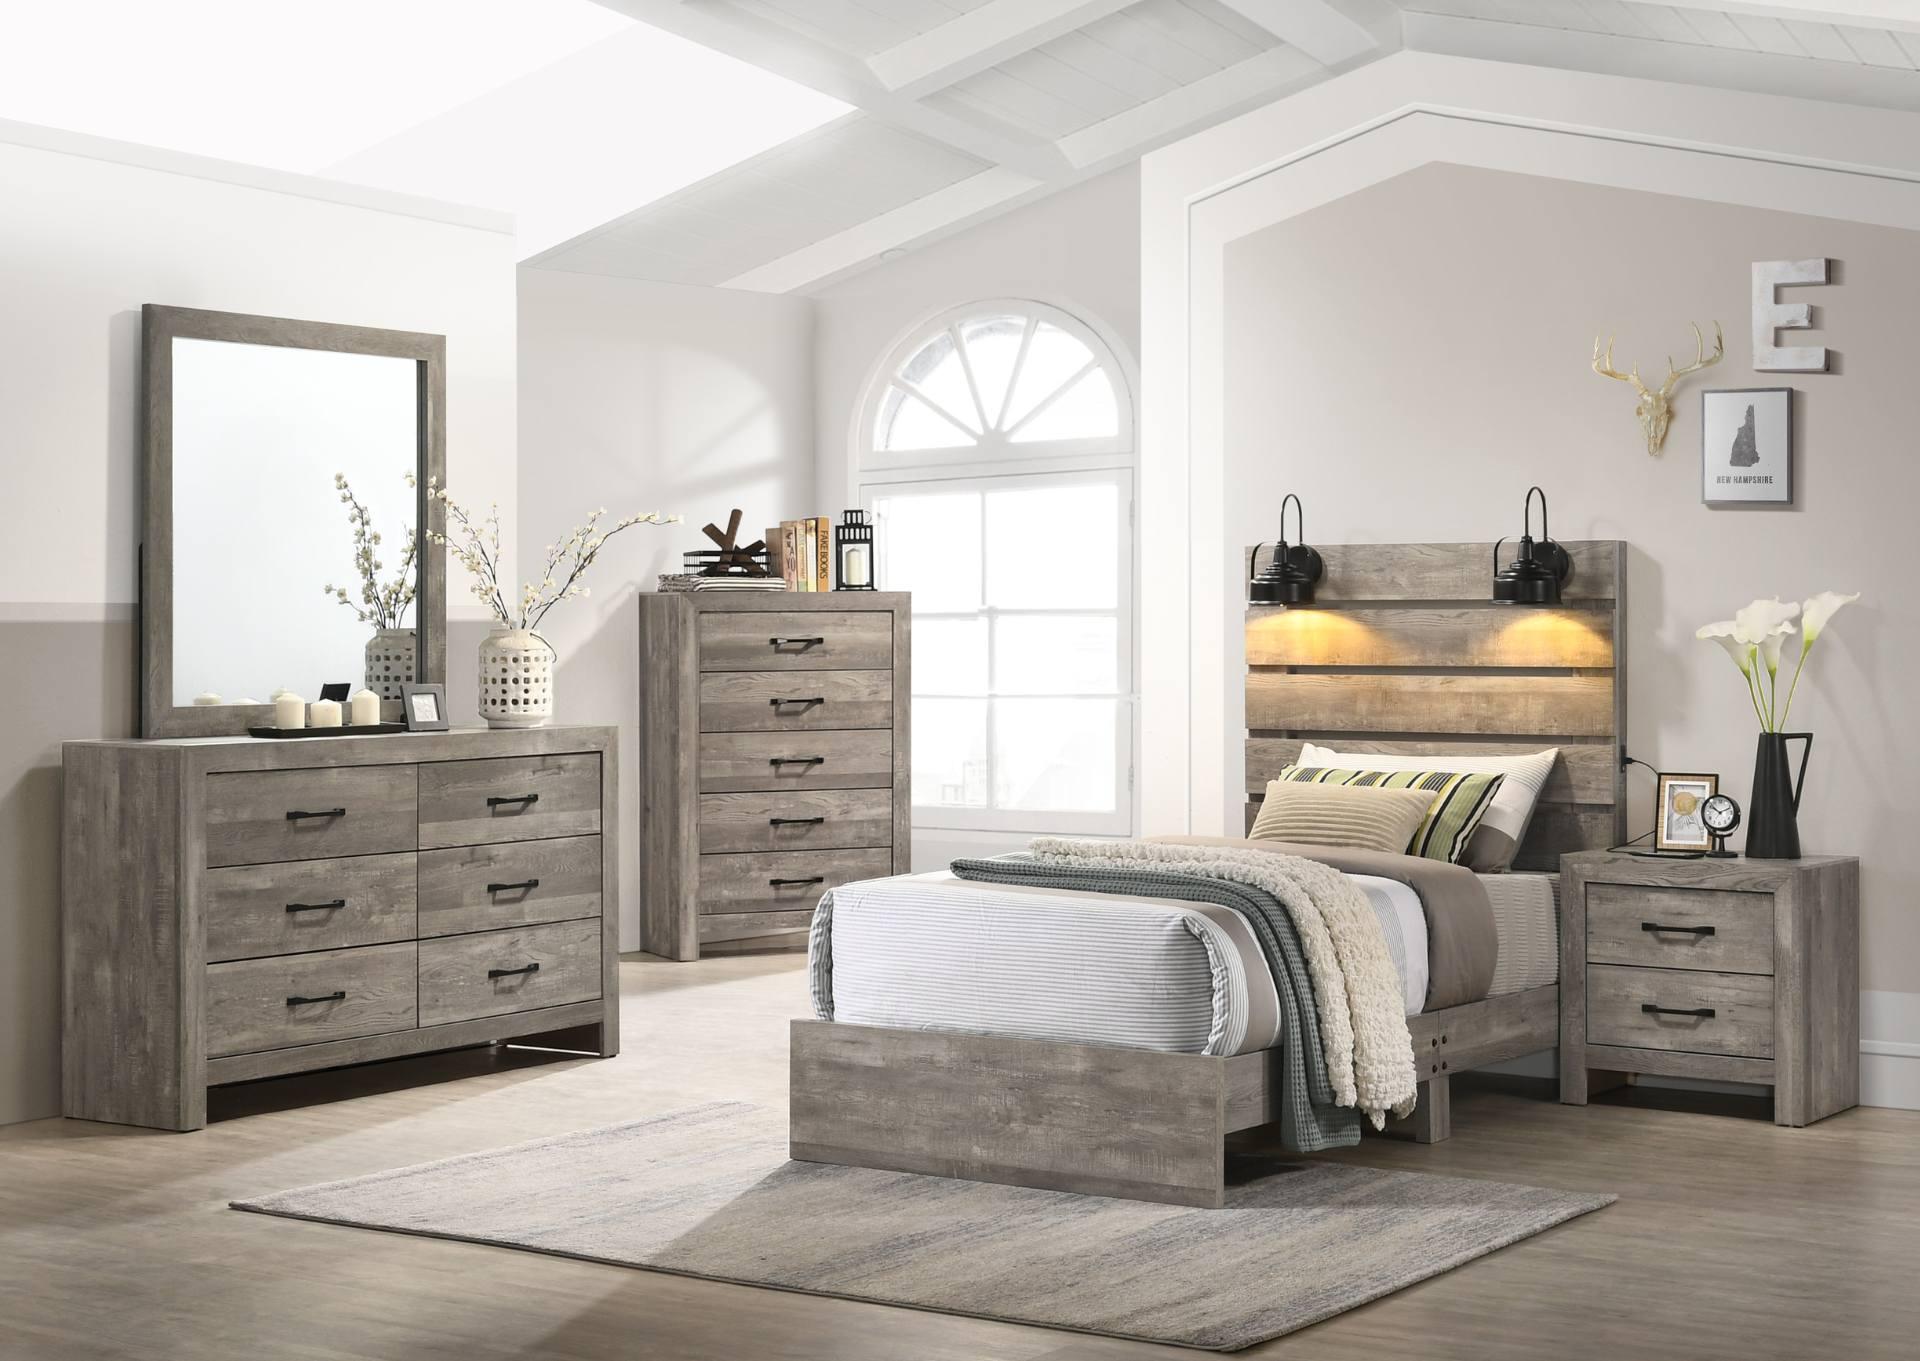 ARIANNA GREY FULL BEDROOM WITH LIGHTS,LIFESTYLE FURNITURE